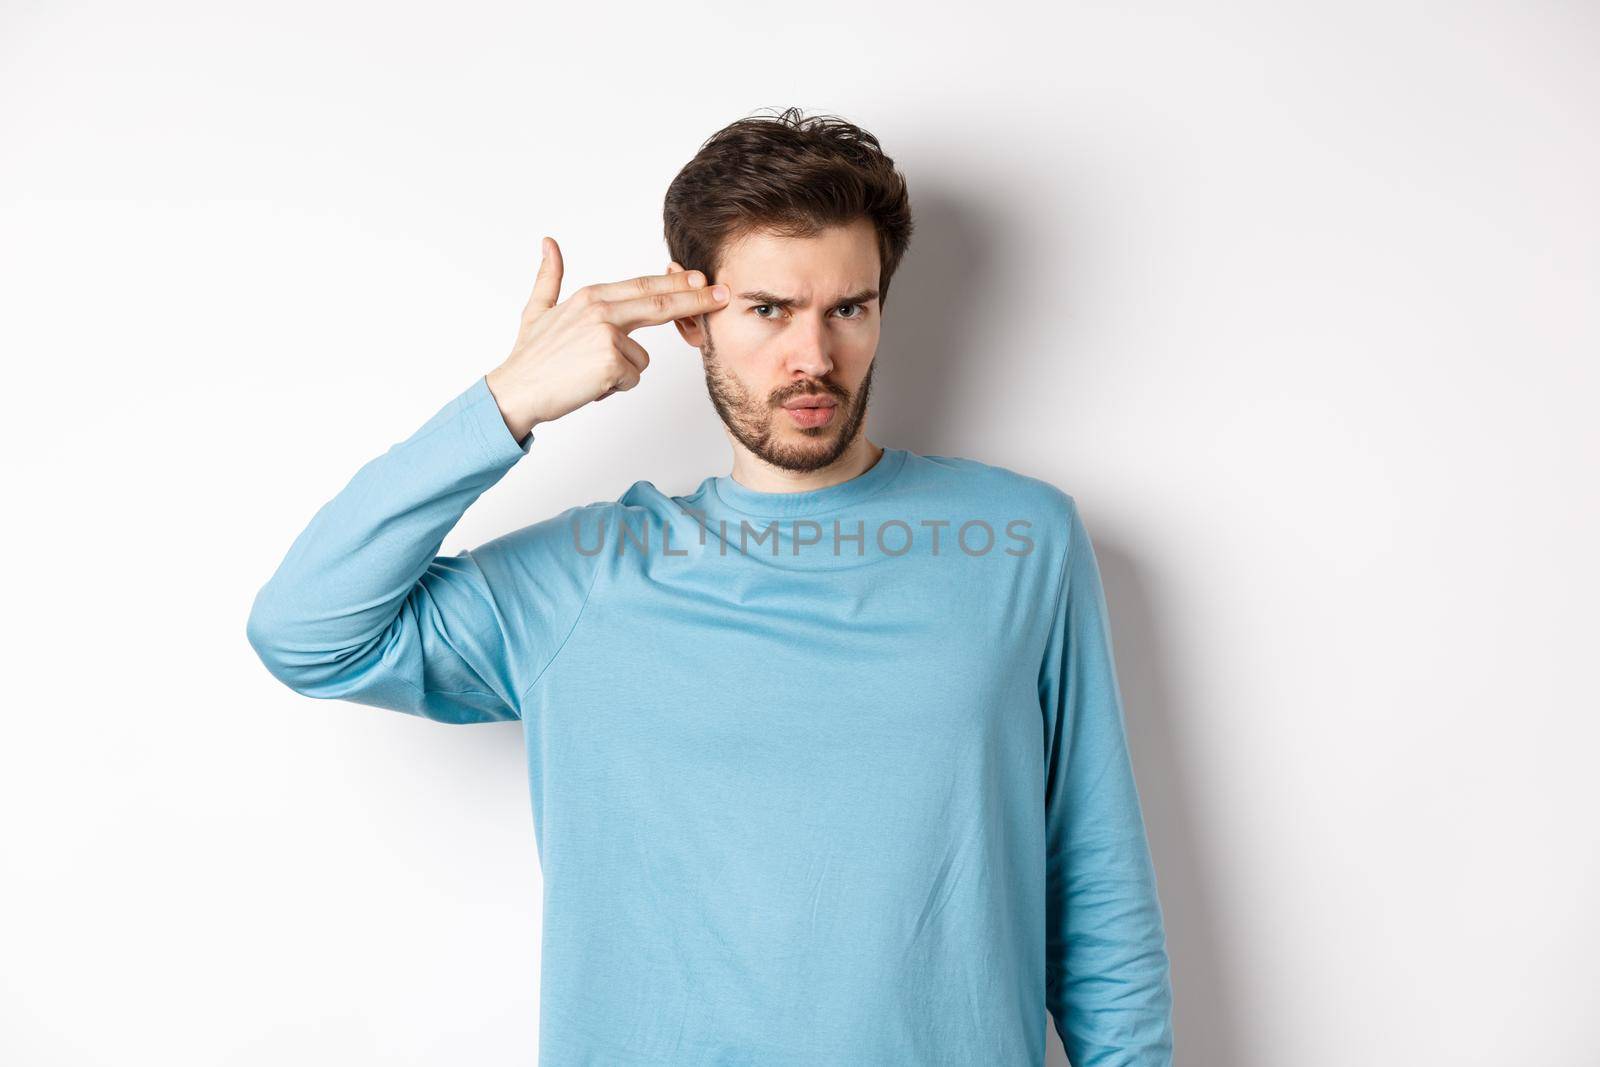 Annoyed young man frowning, showing shooting gun near head gesture, blow brain out sign, standing over white background.